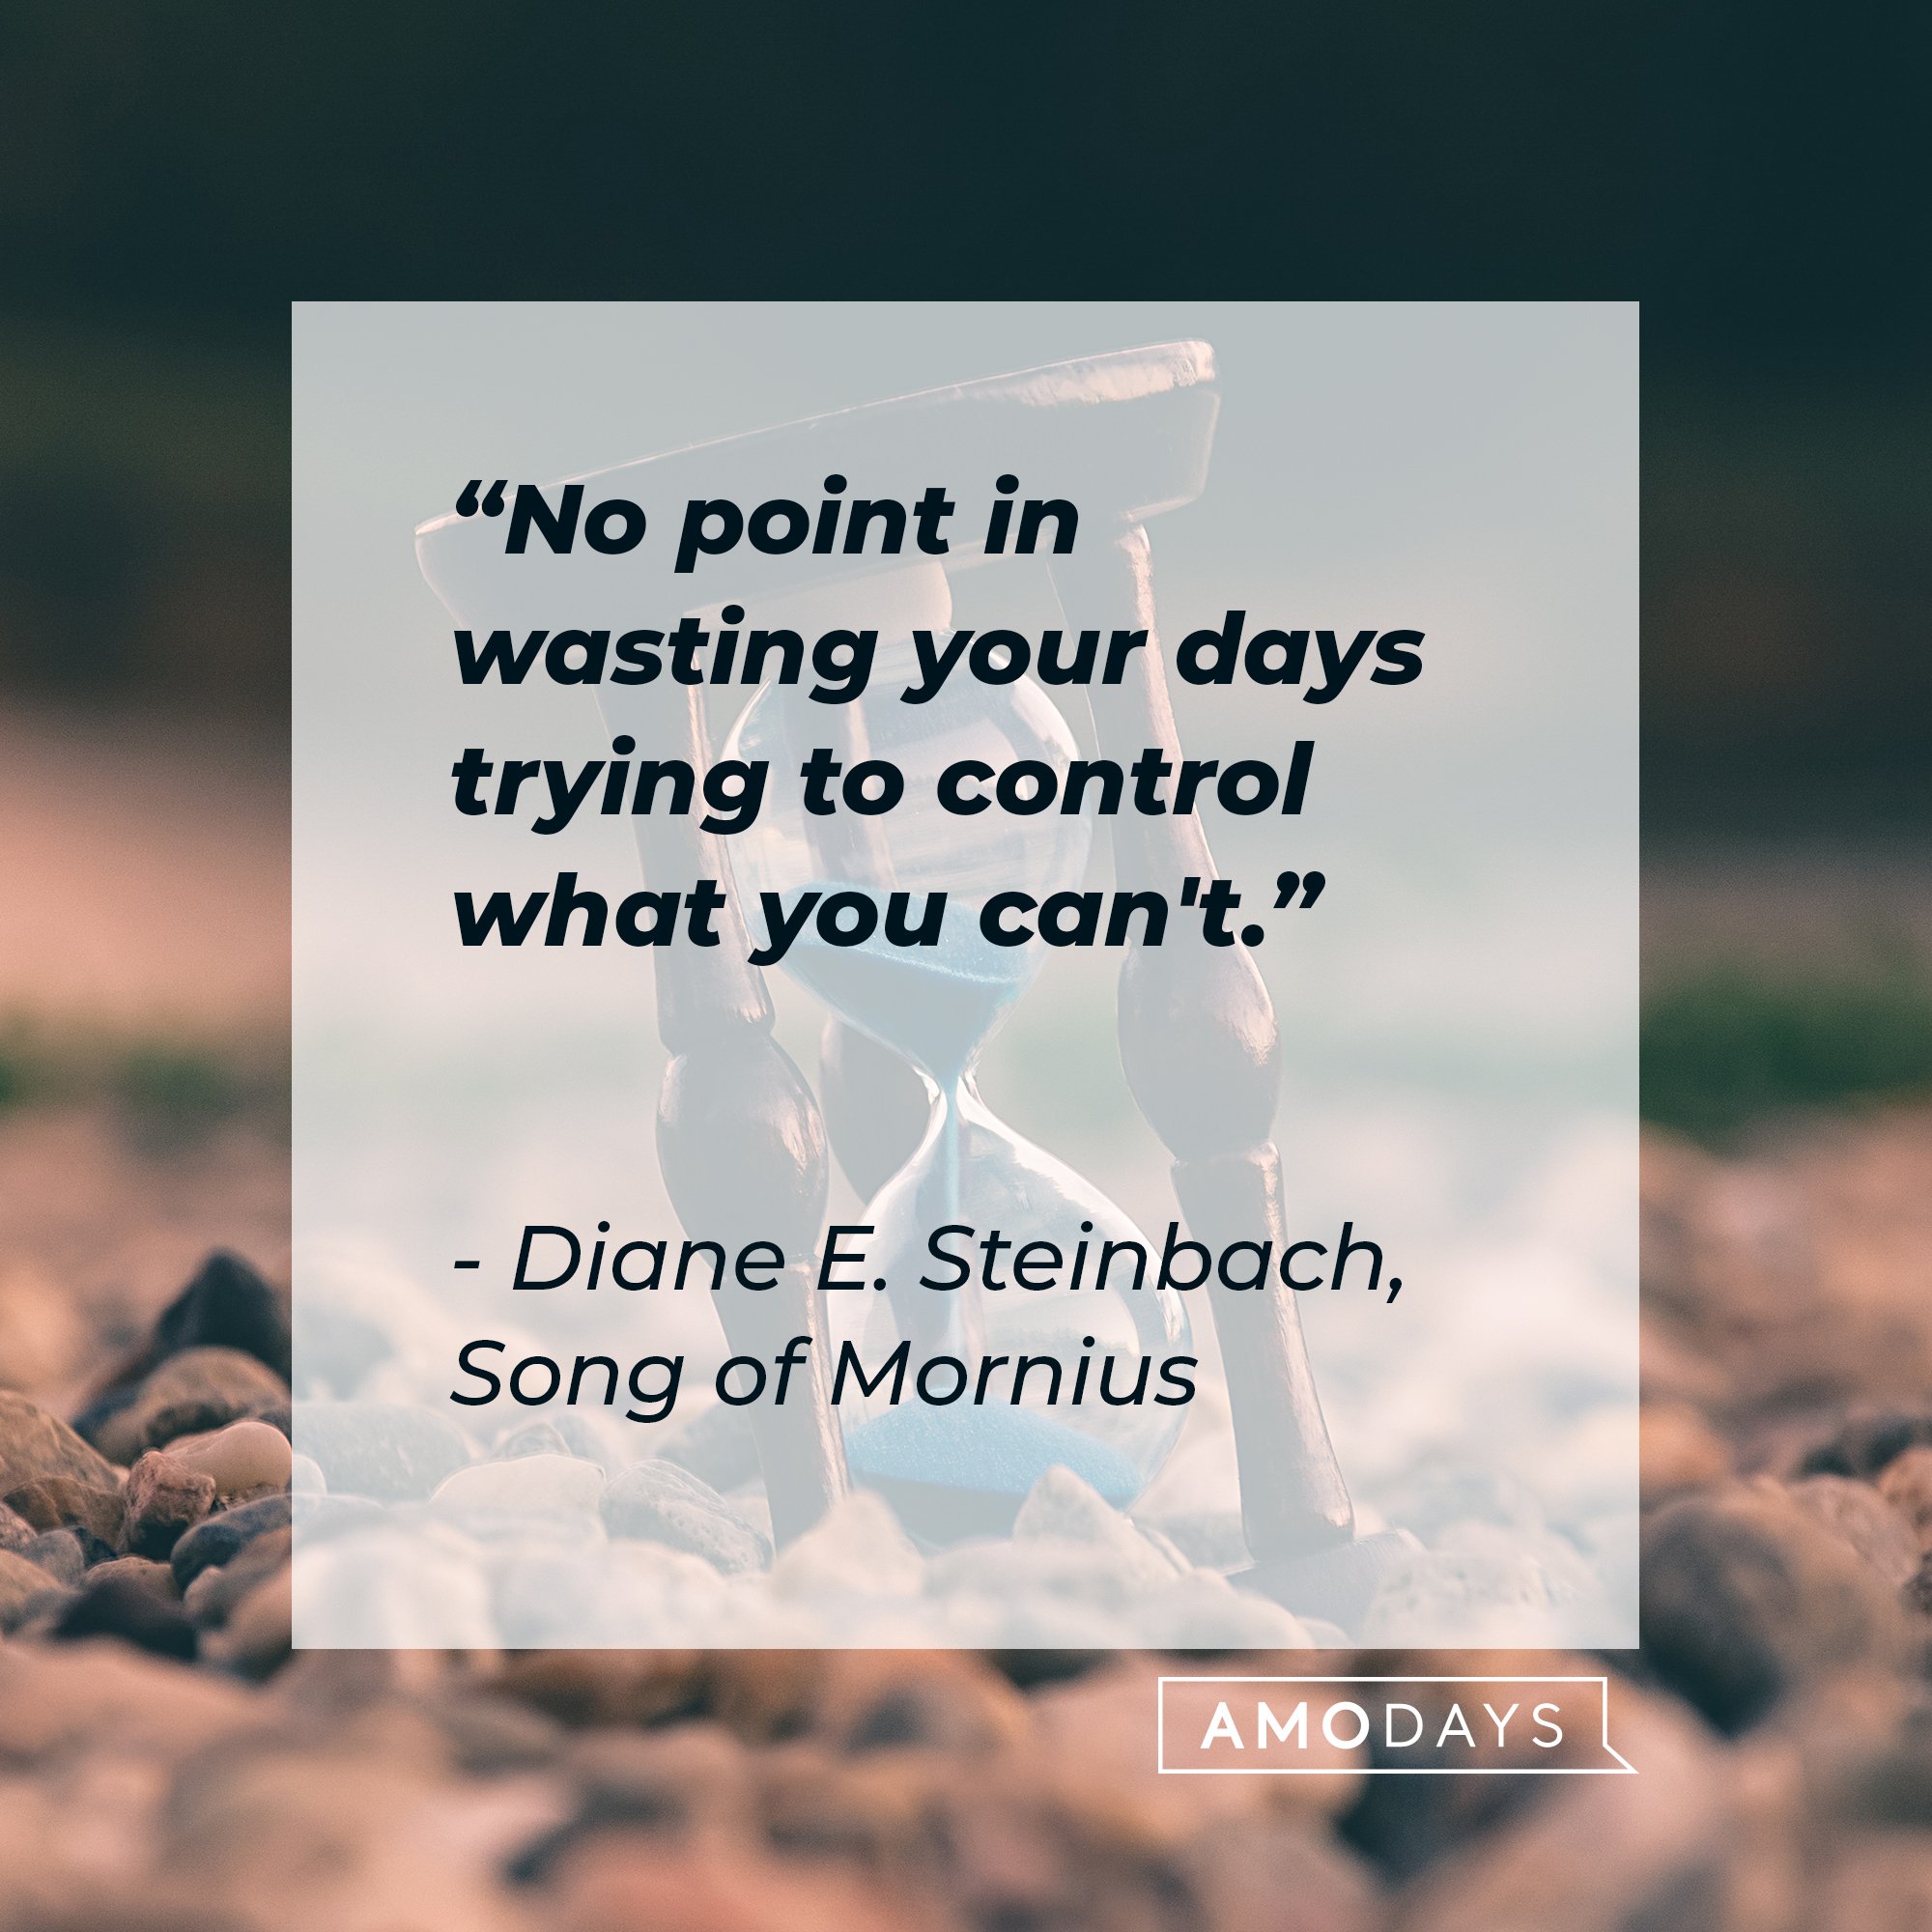 Diane E. Steinbach, Song of Mornius’s quote: "No point in wasting your days trying to control what you can't." | Image: AmoDays